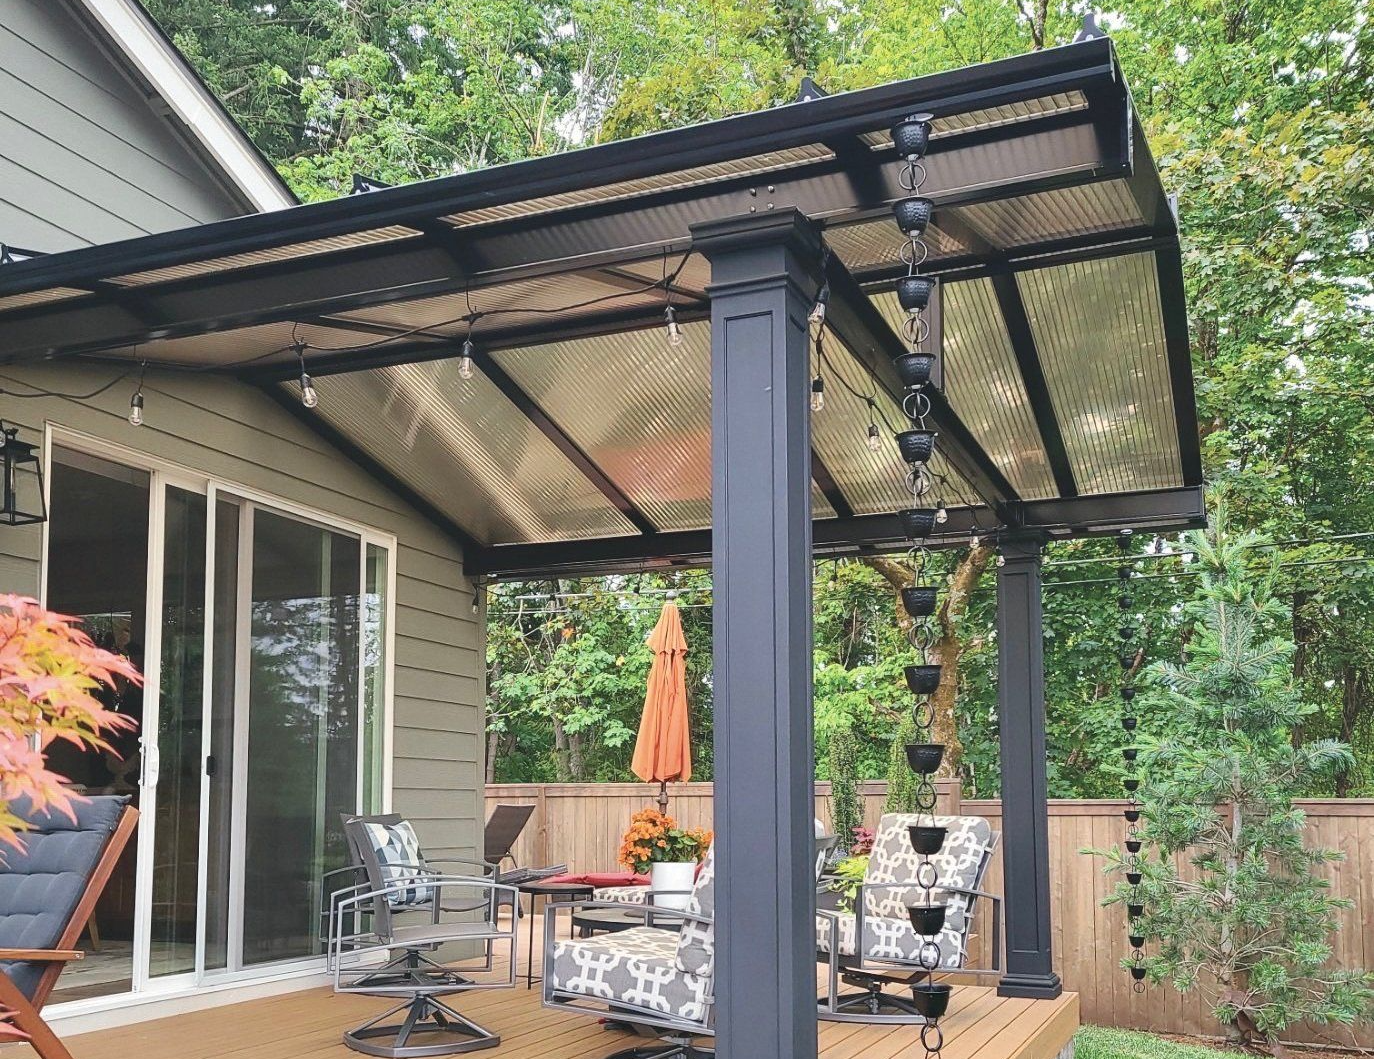 Patio Covers in Battle ground Washington - Gable Roof with ACRYLITE Acrylic